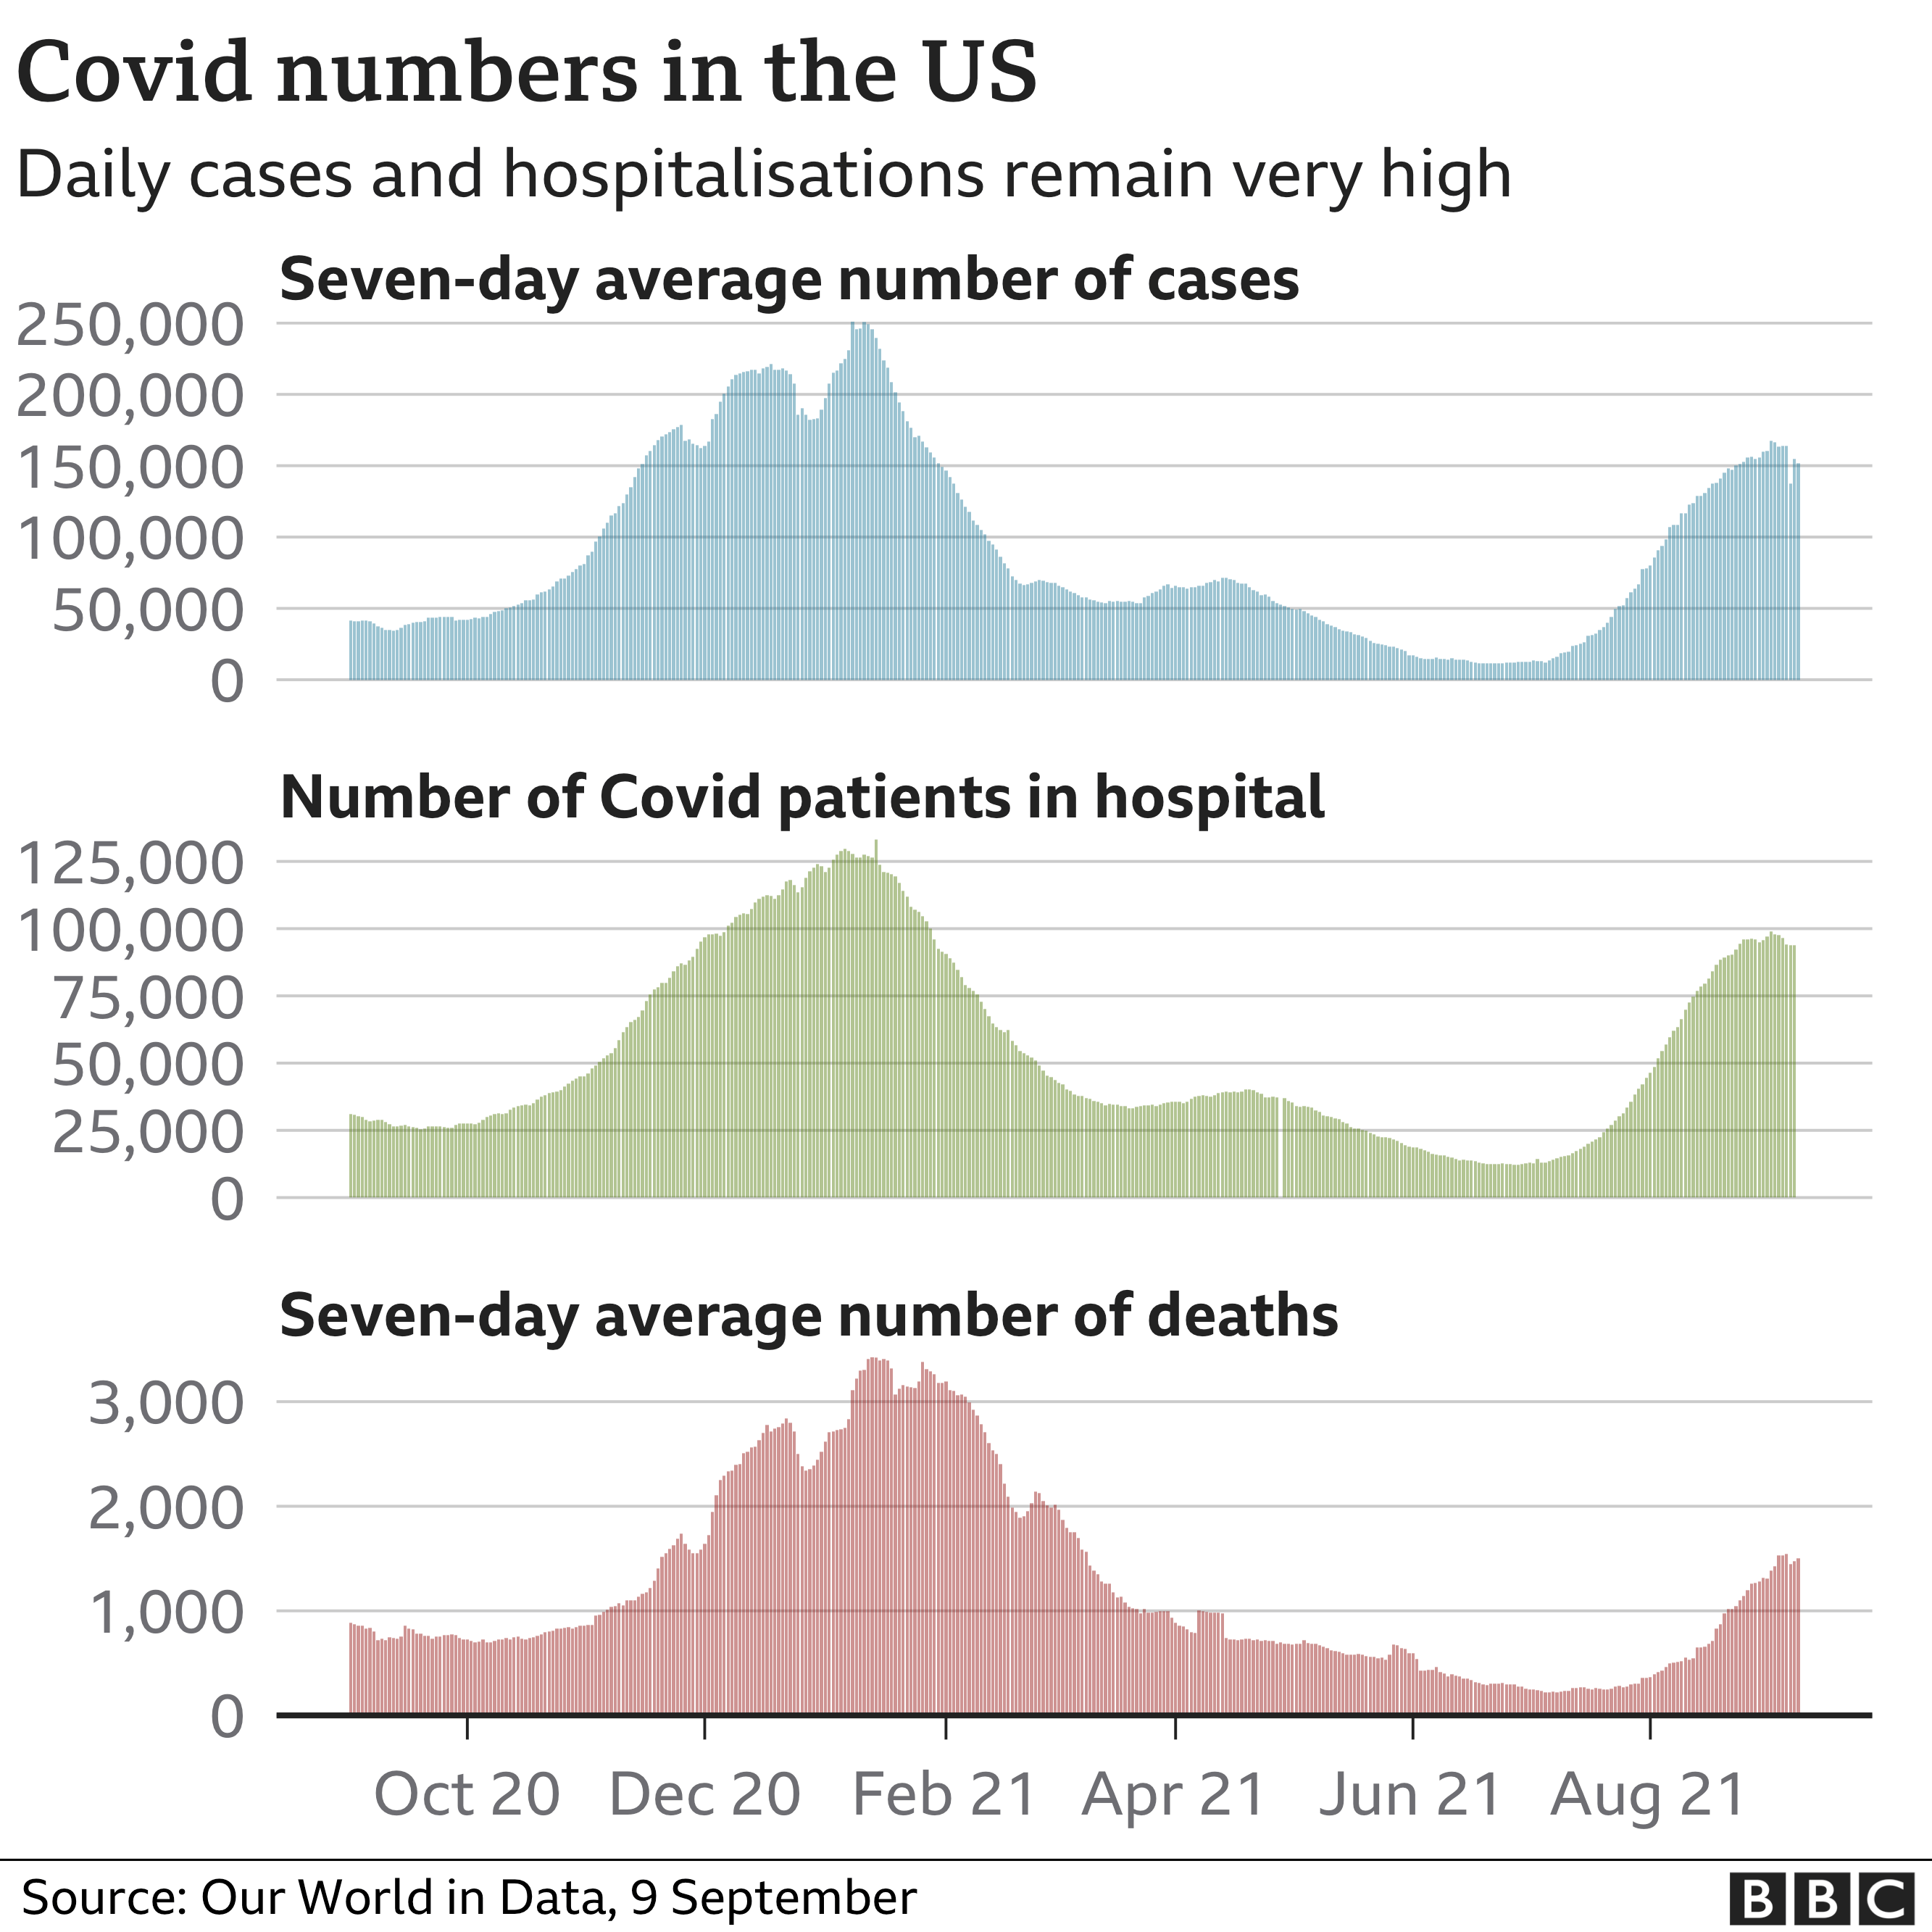 Covid numbers in the US graph